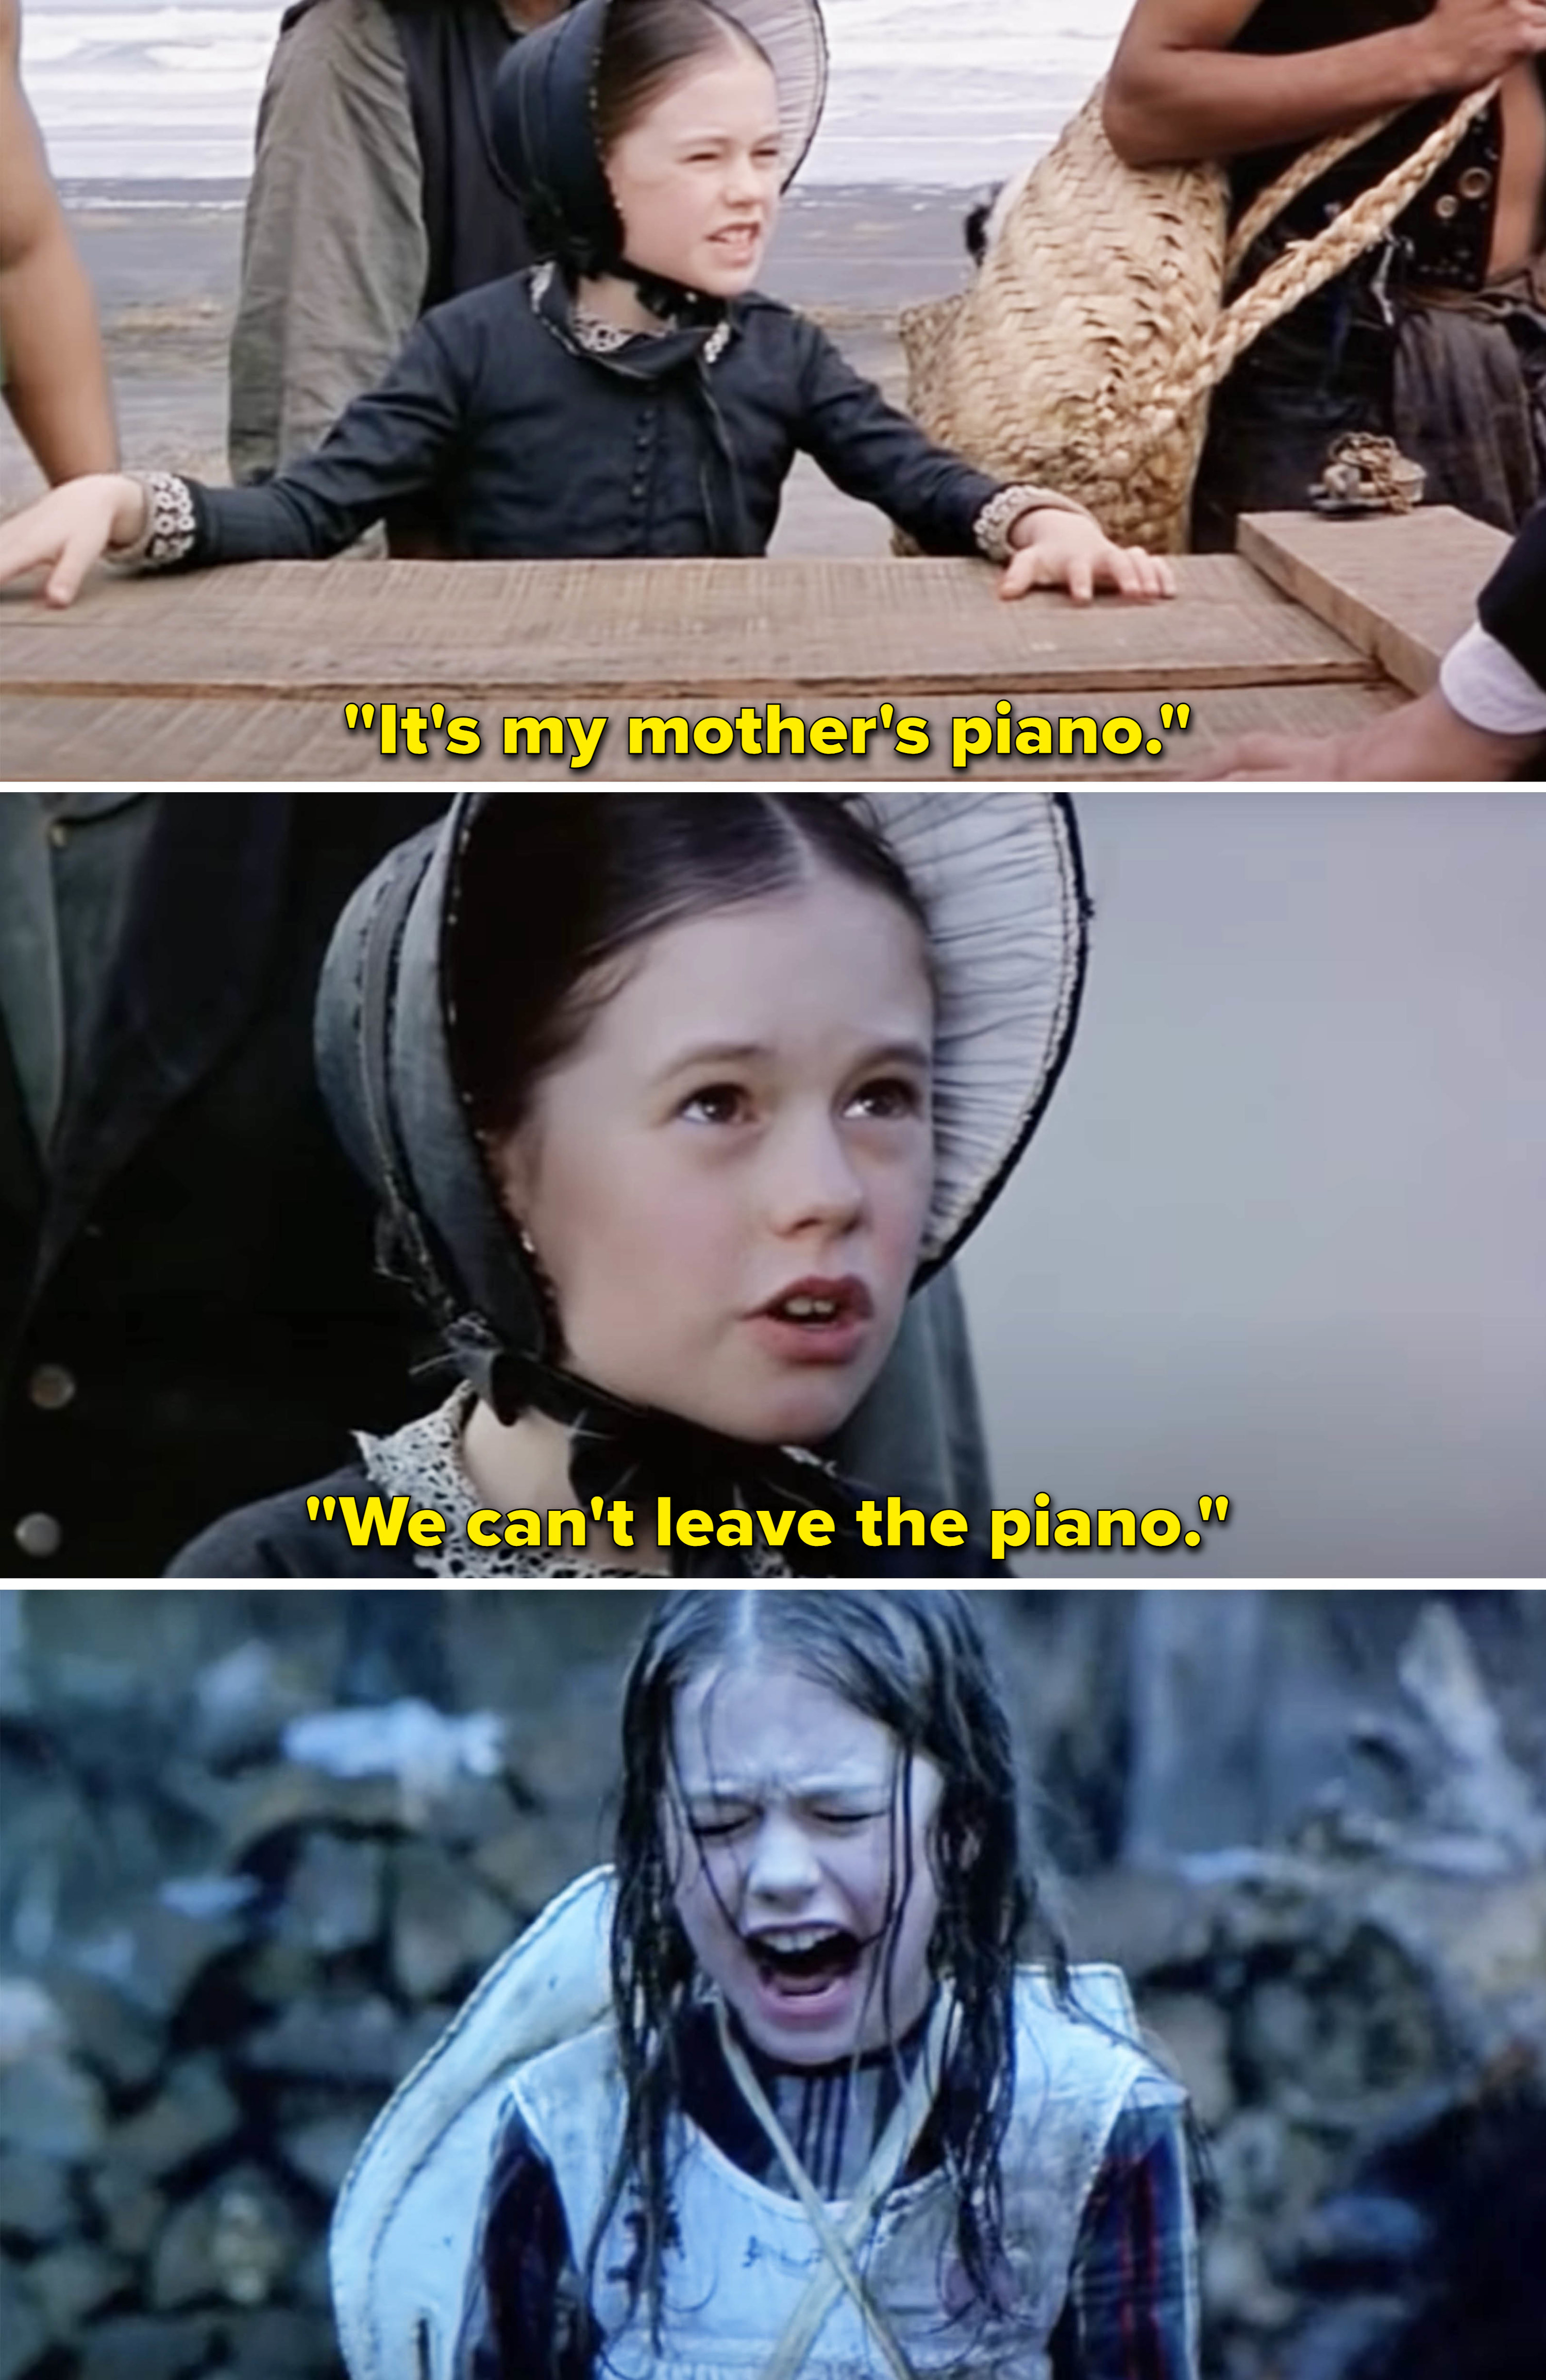 Flora saying it&#x27;s her mother&#x27;s piano and &quot;We can&#x27;t leave the piano,&quot; and then crying